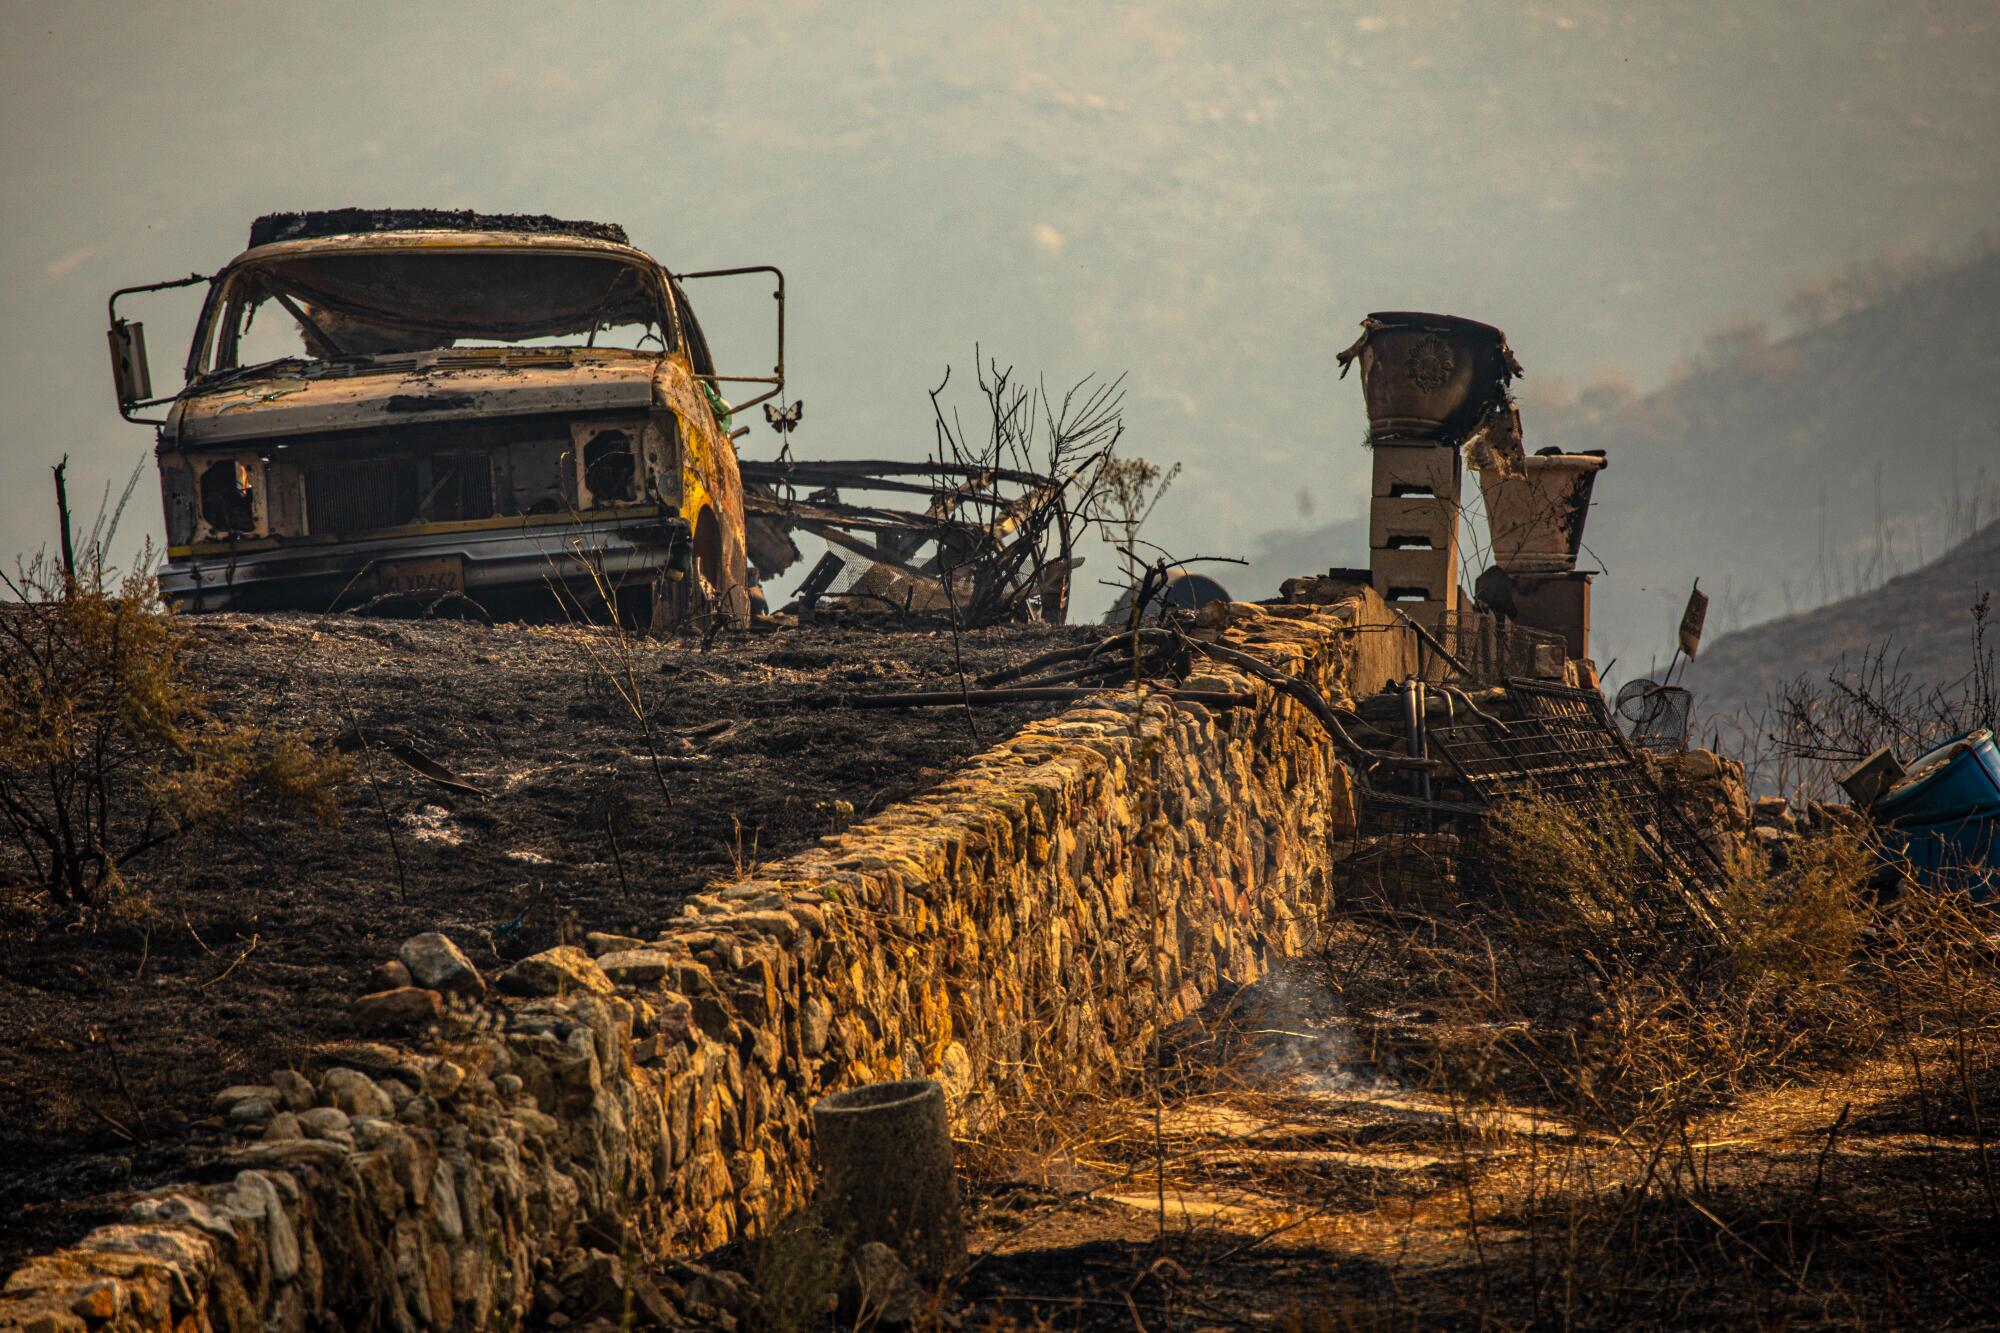 A burned out vehicle in an ashy landscape.